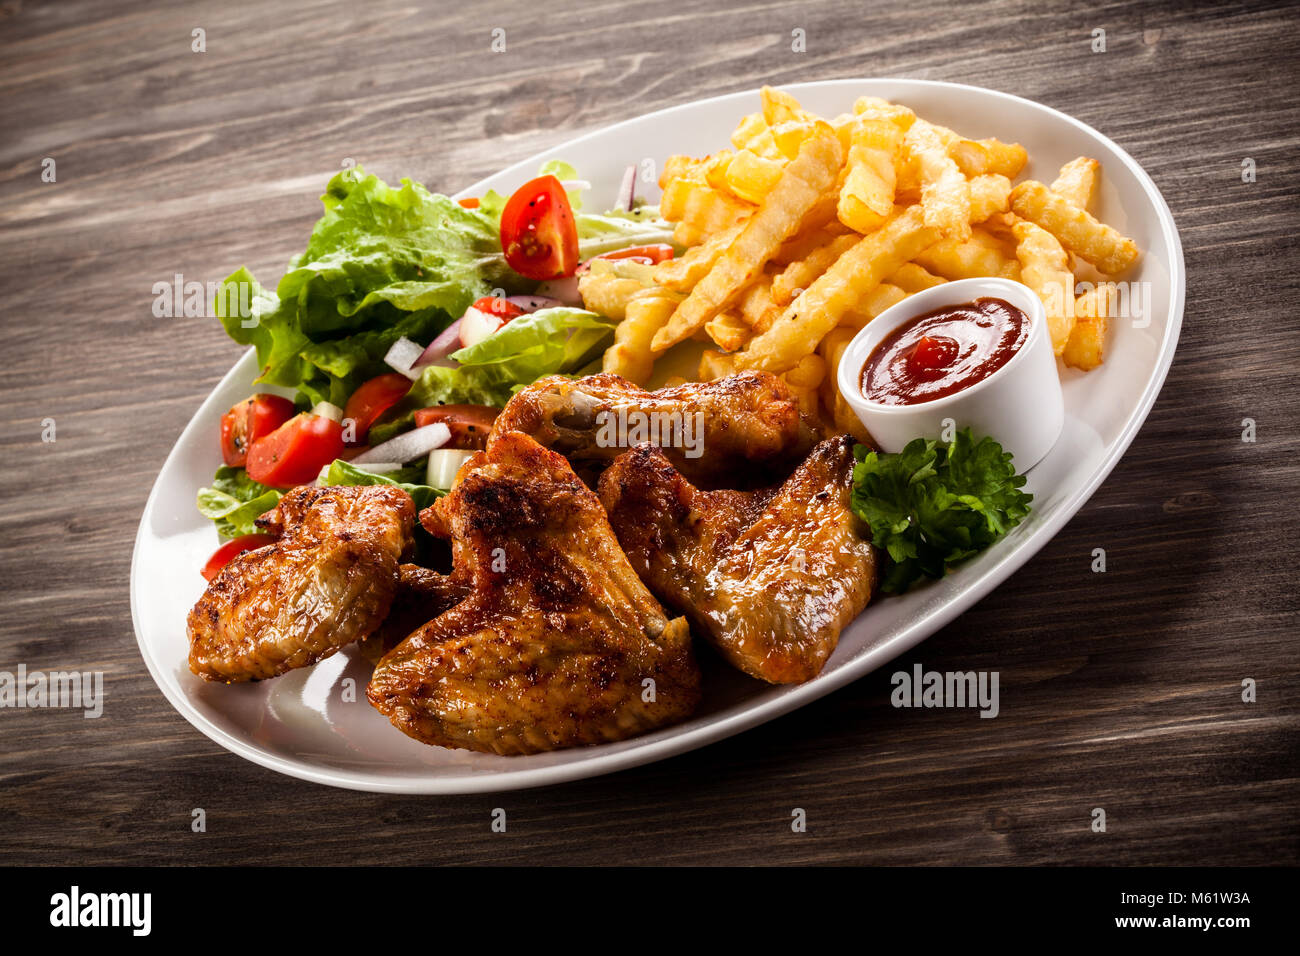 Grilled chicken wings, chips and vegetables on wooden table Stock Photo ...